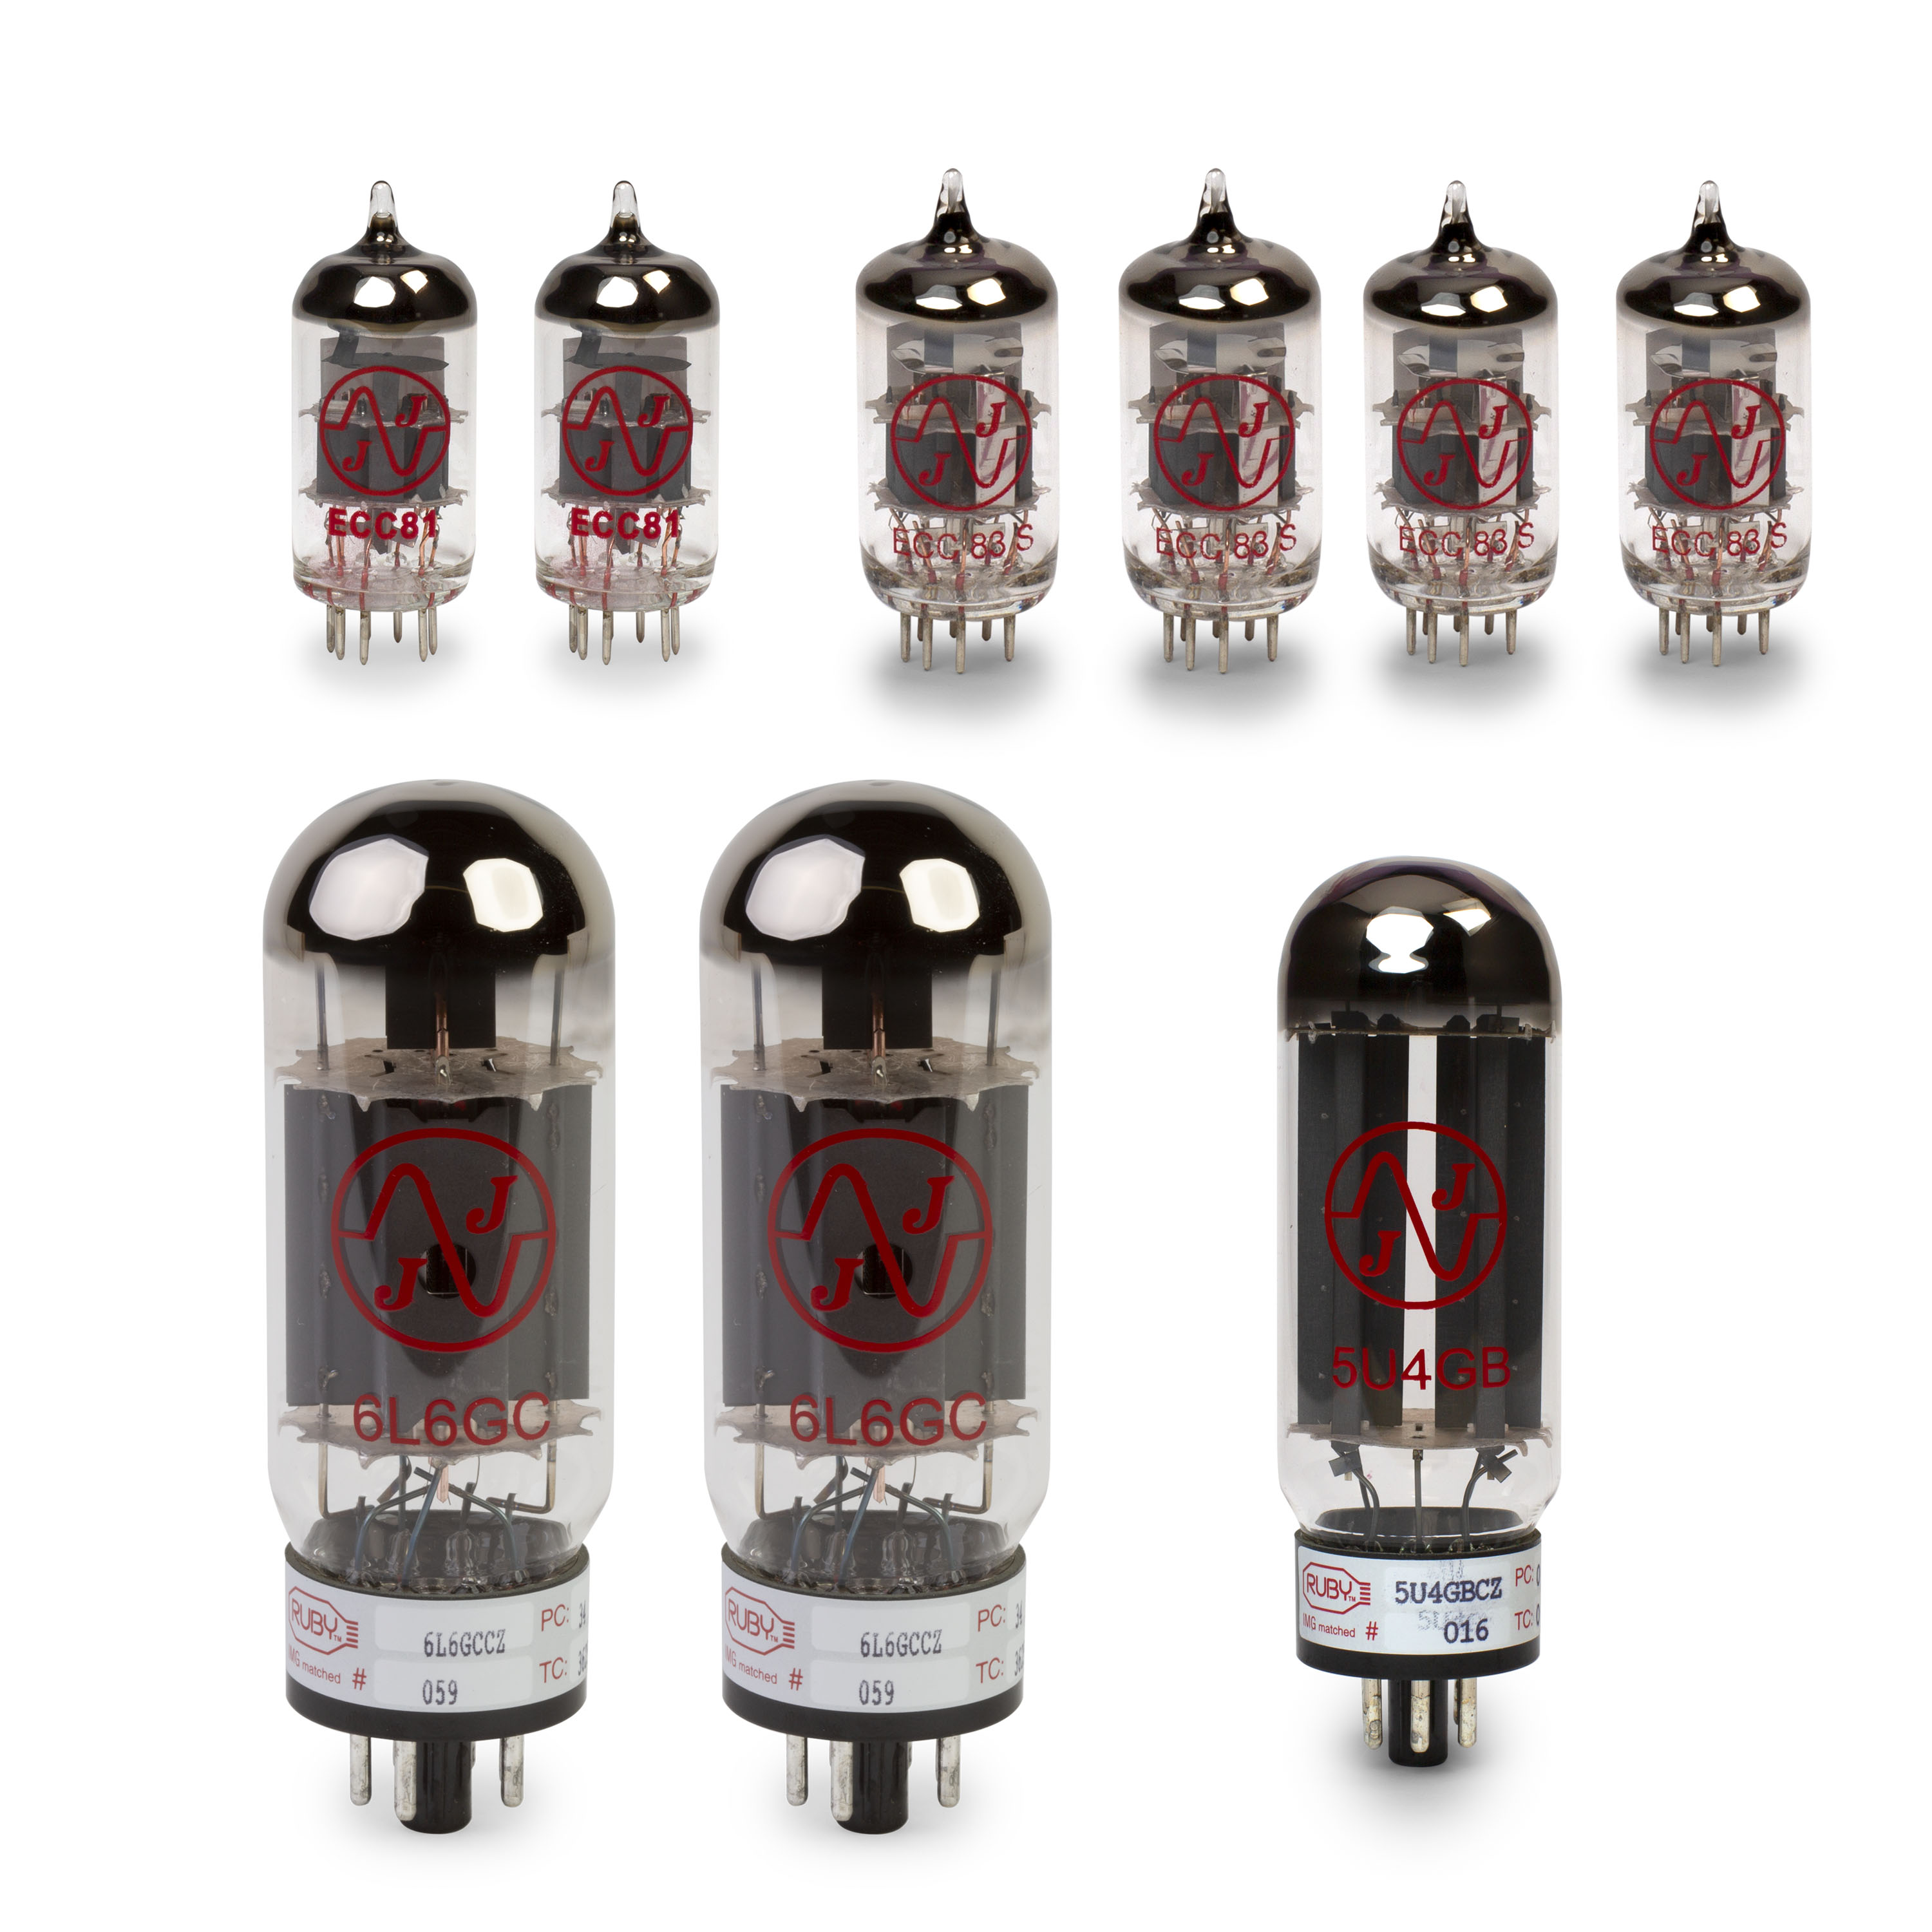 Fender Super Reverb (Silver Panel) Tube Set with Matched Power Tubes